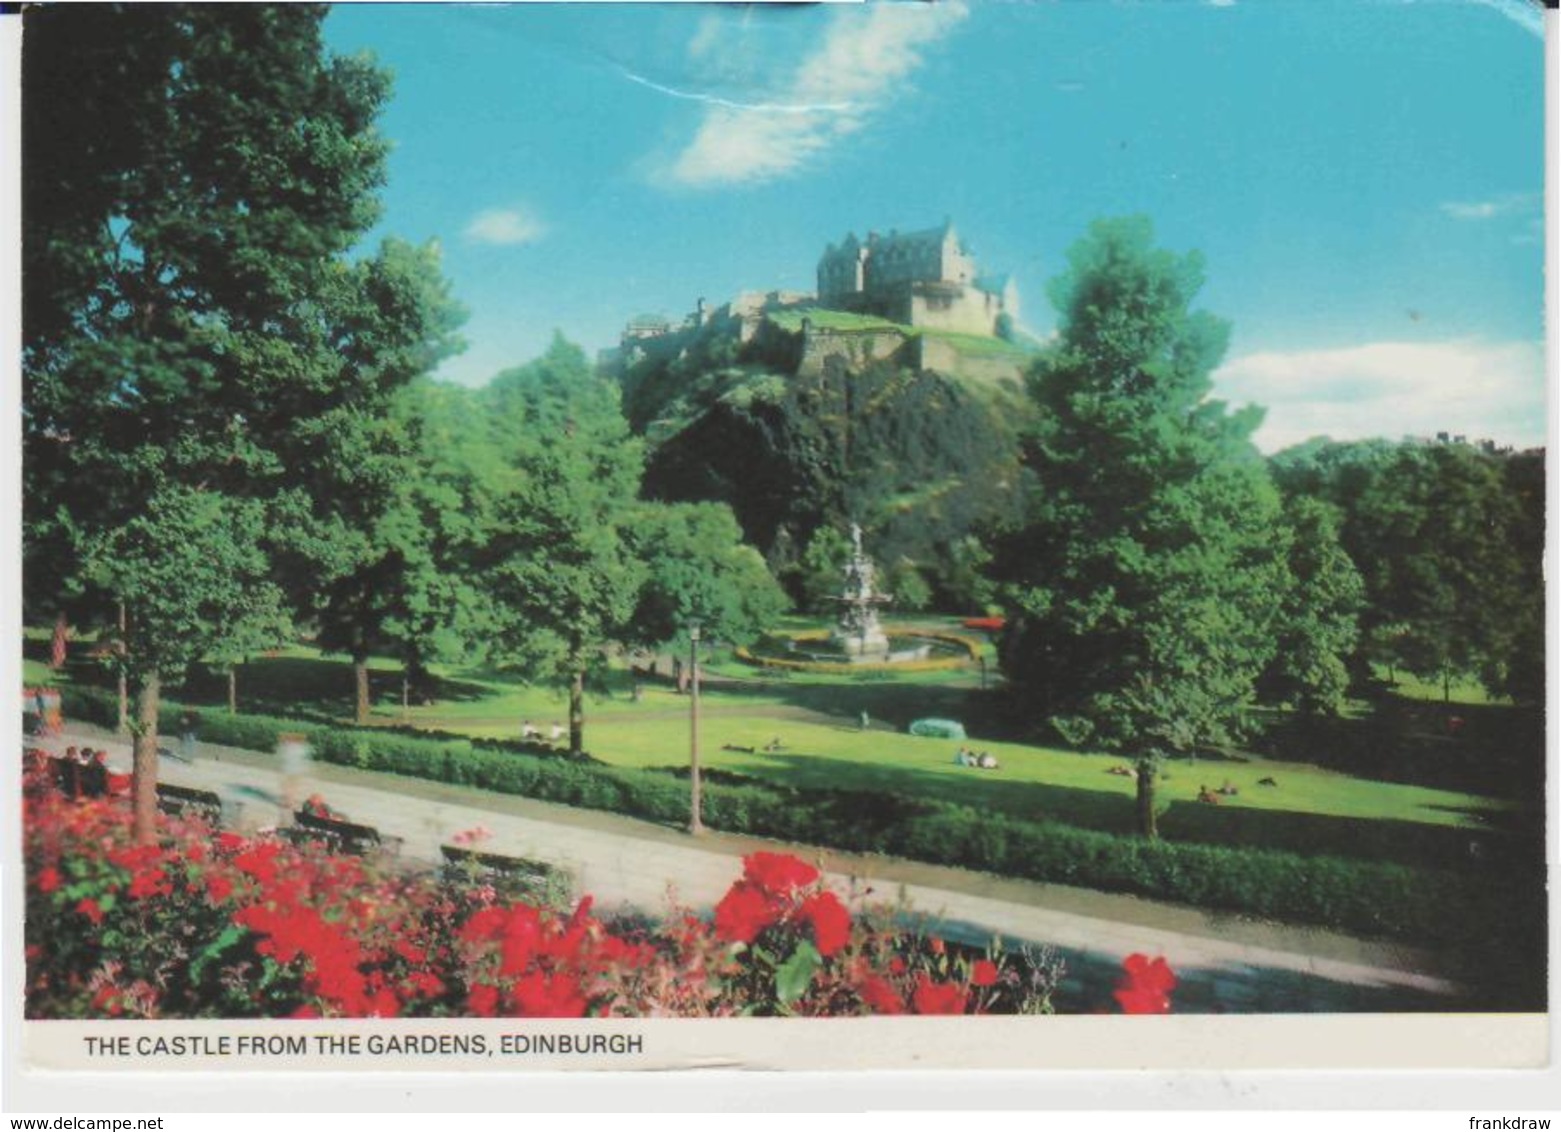 Postcard - The Castle From The Gardens, Edinburgh - Posted But Date Obscured Very Good - Unclassified